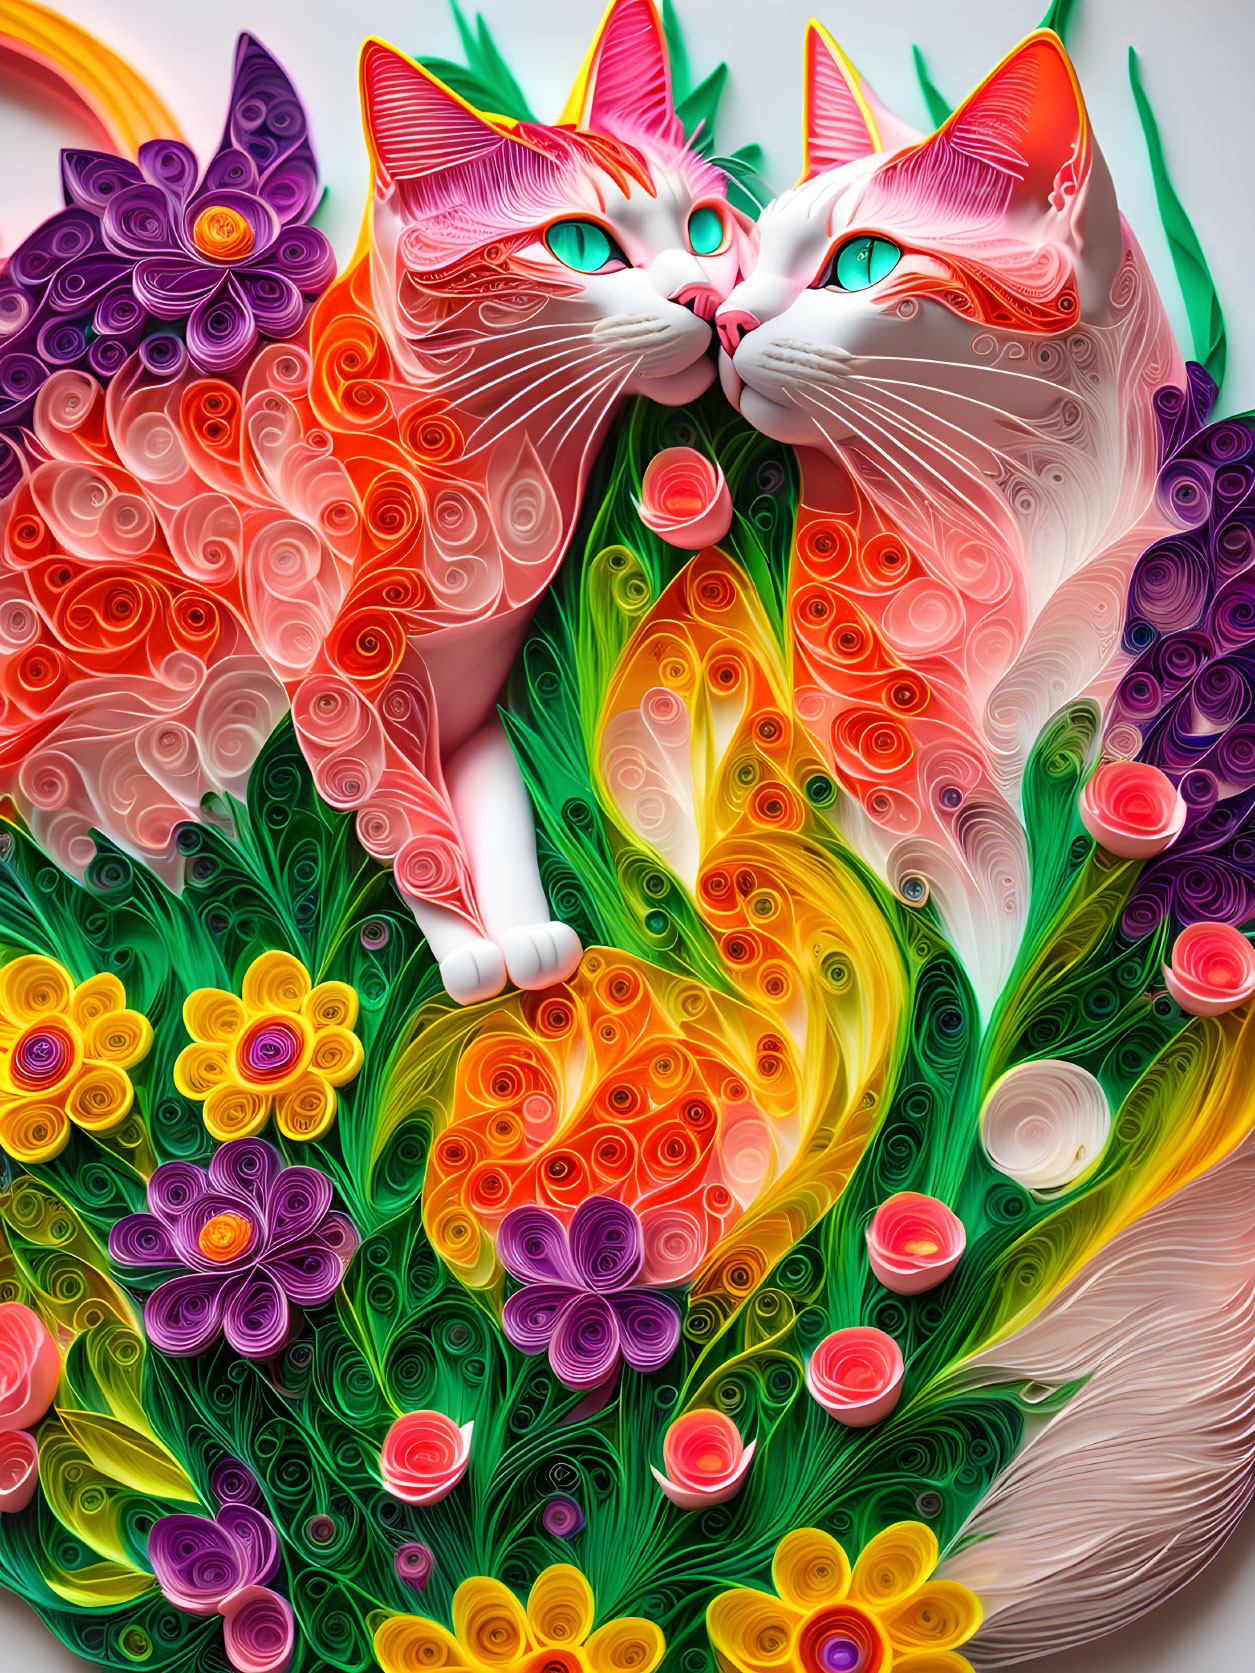 Colorful Paper Quilling Art: Two Cats with Swirl Patterns & Floral Textures